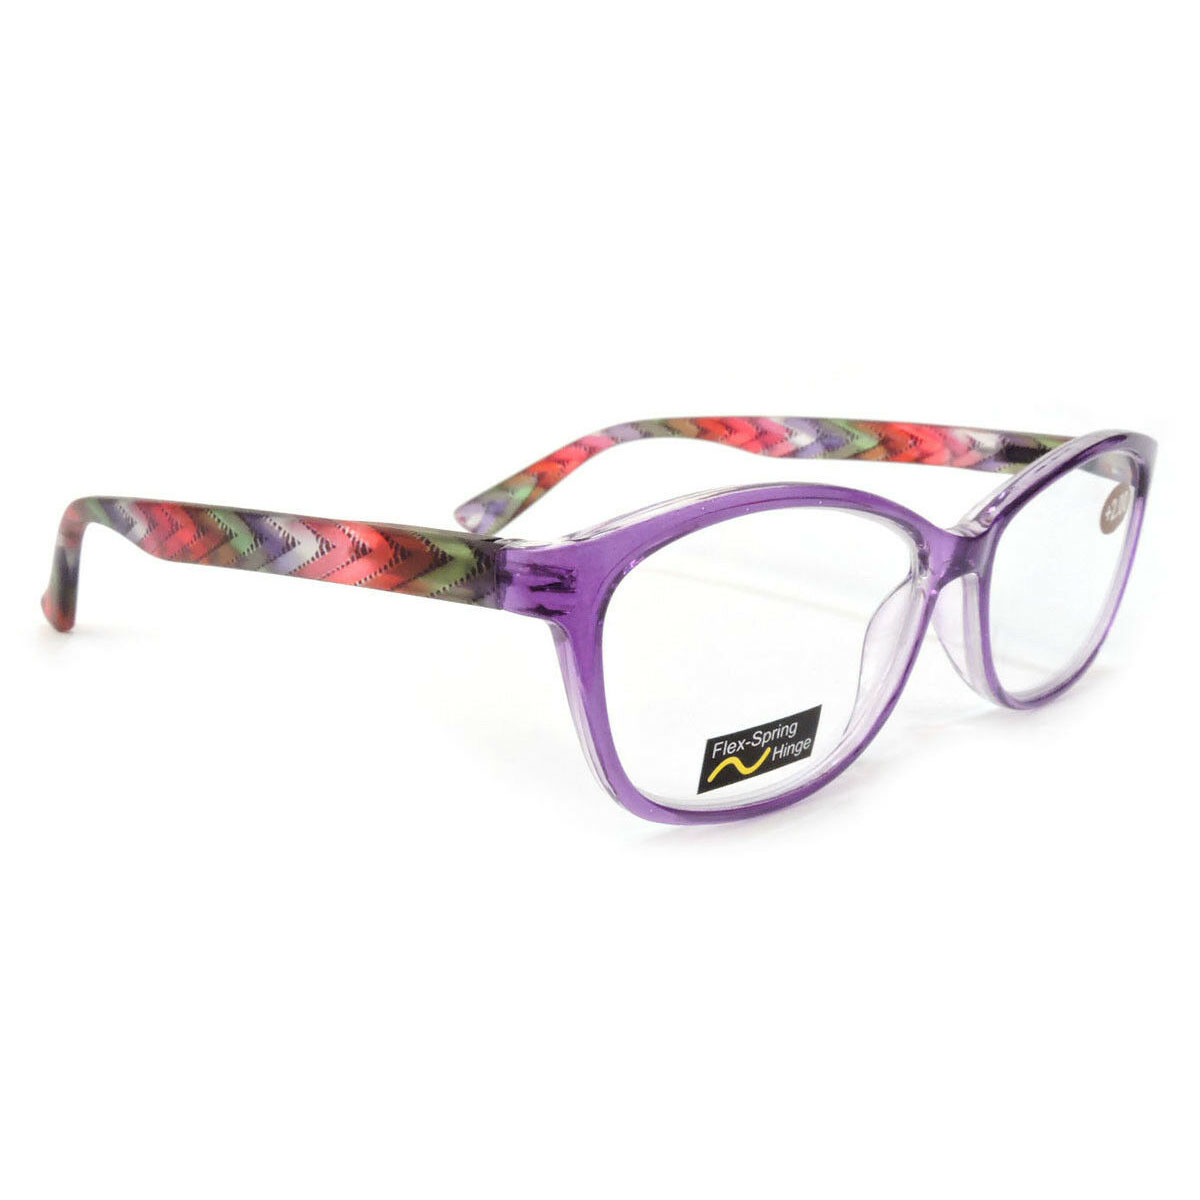 Classic Frame Reading Glasses Colorful Arms Retro Vintage Style - Purple, +2.50